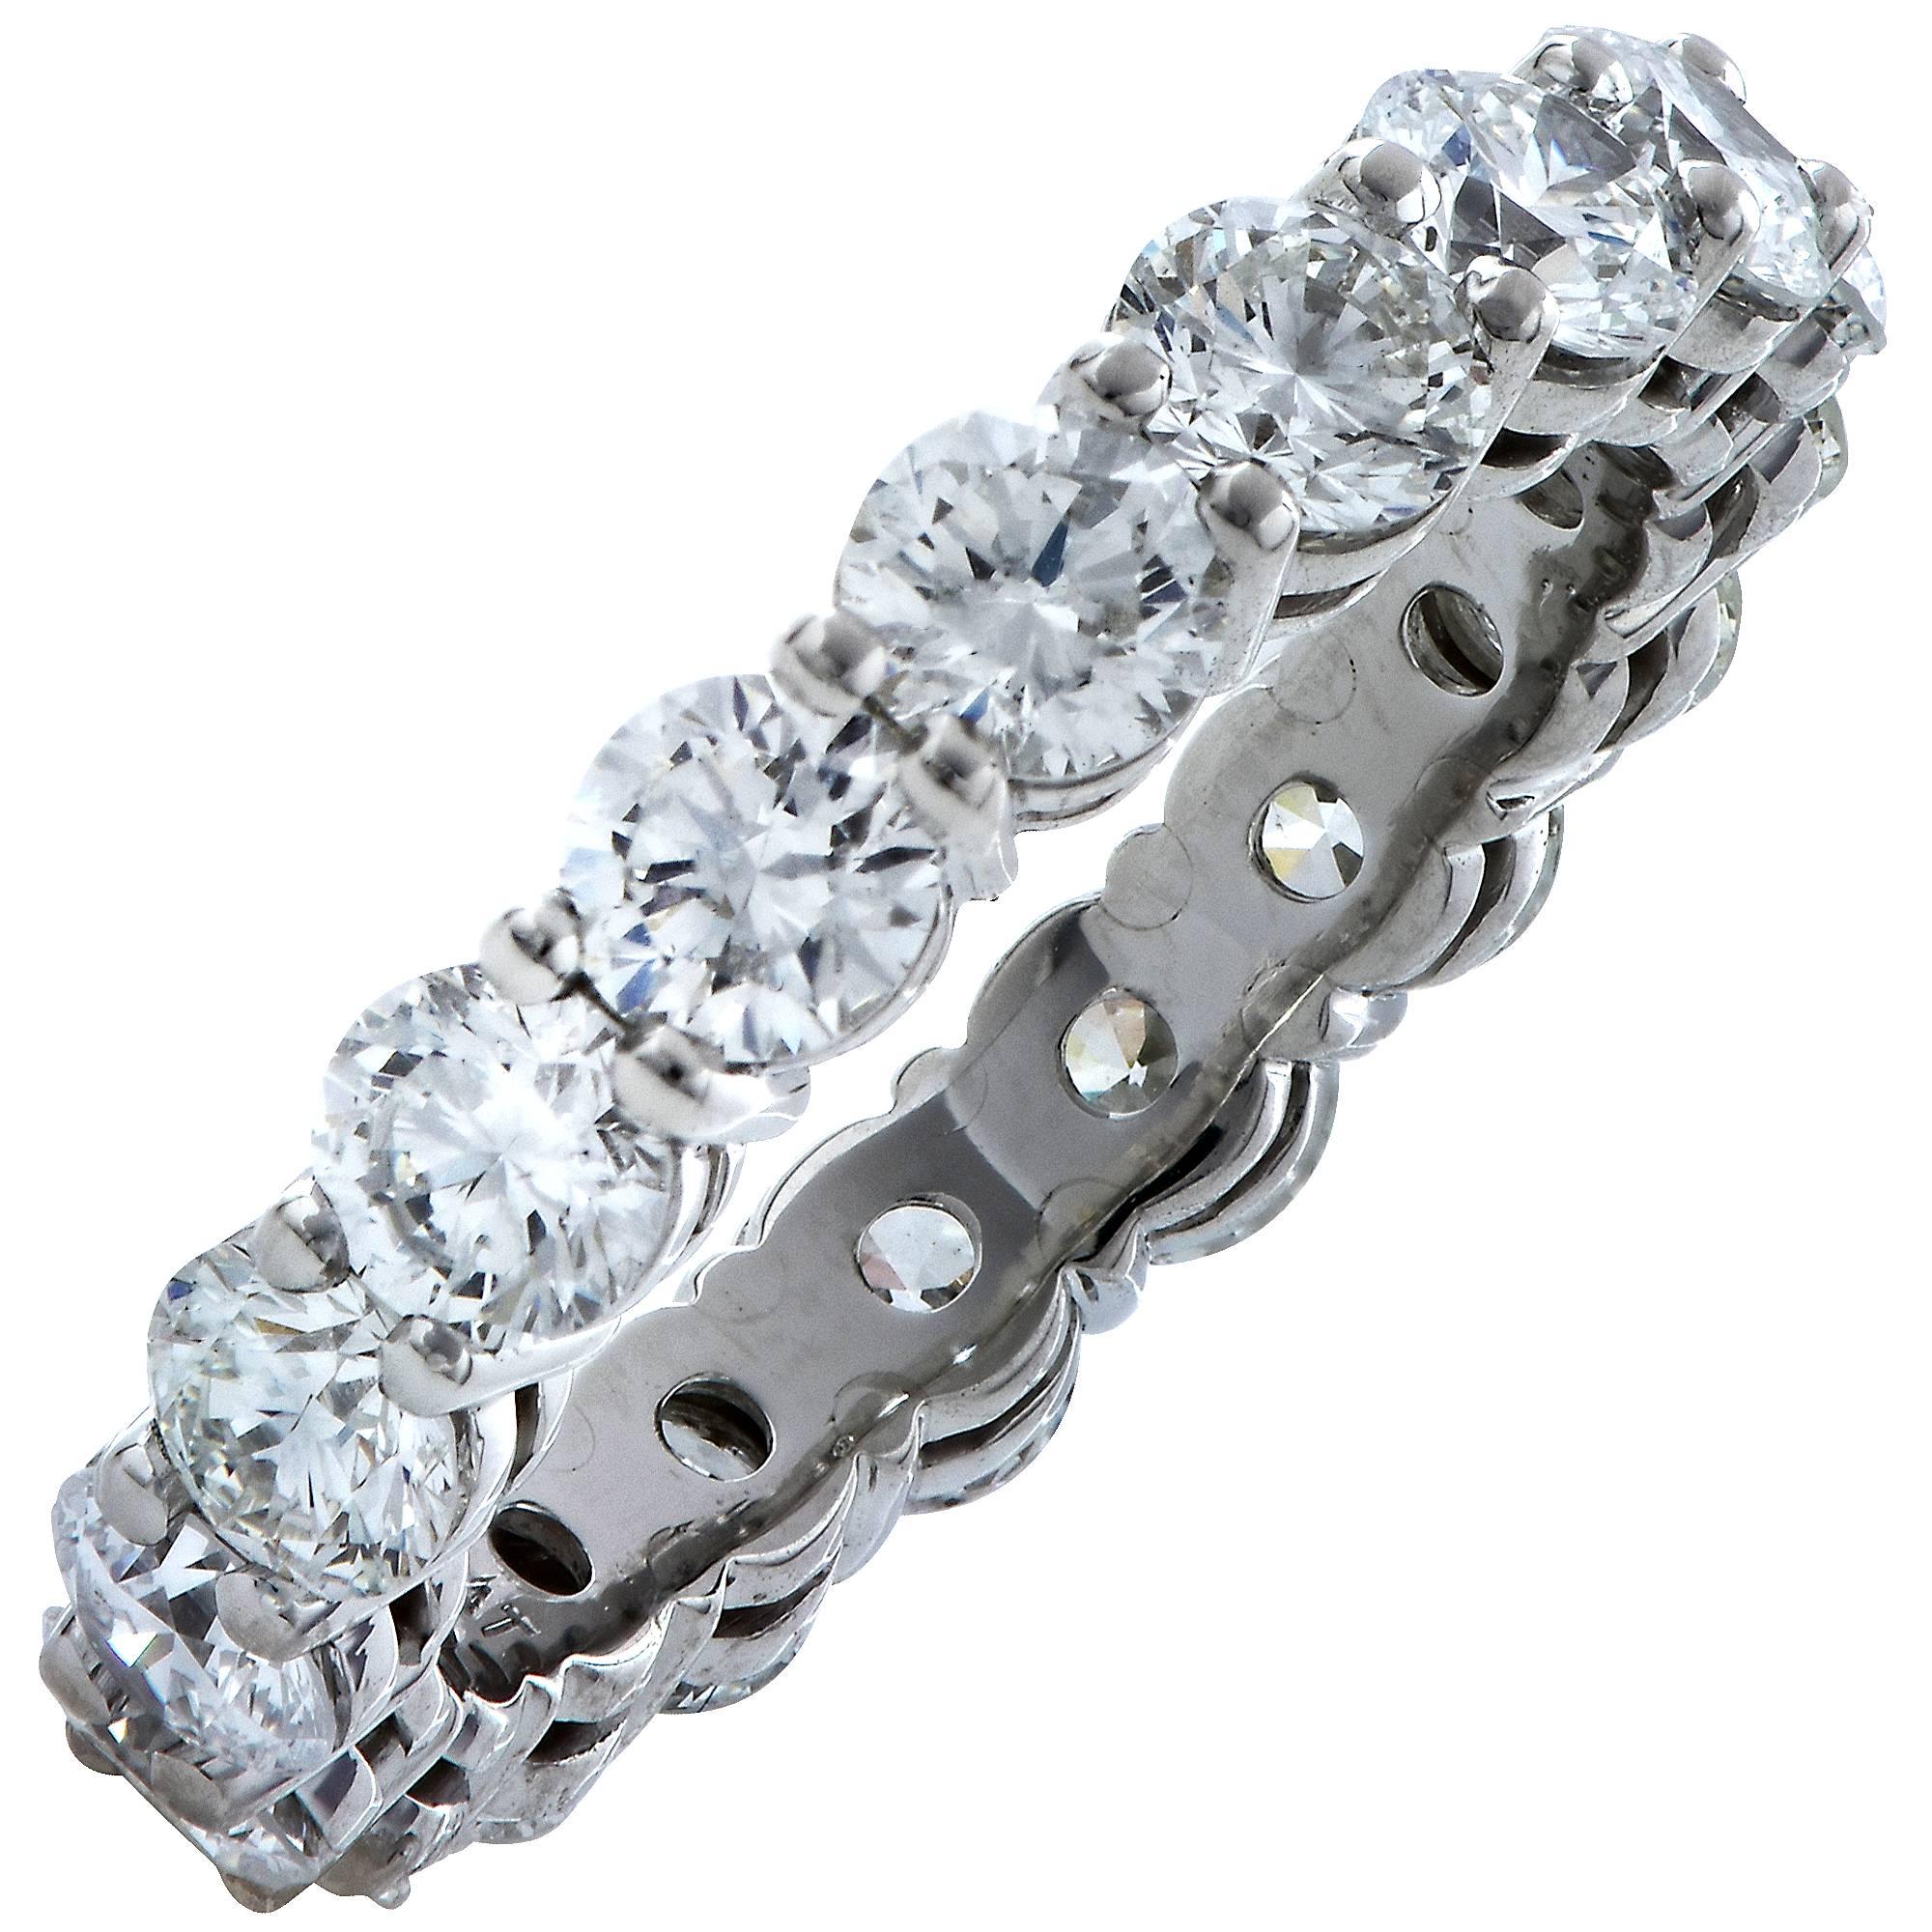 Platinum diamond eternity band featuring 18 round brilliant cut diamonds weighing 2.70cts F-G color and VS clarity.

The ring is a size 4.5 and cannot be sized up or down.
It is stamped and/or tested as platinum.
The metal weight is 4.19